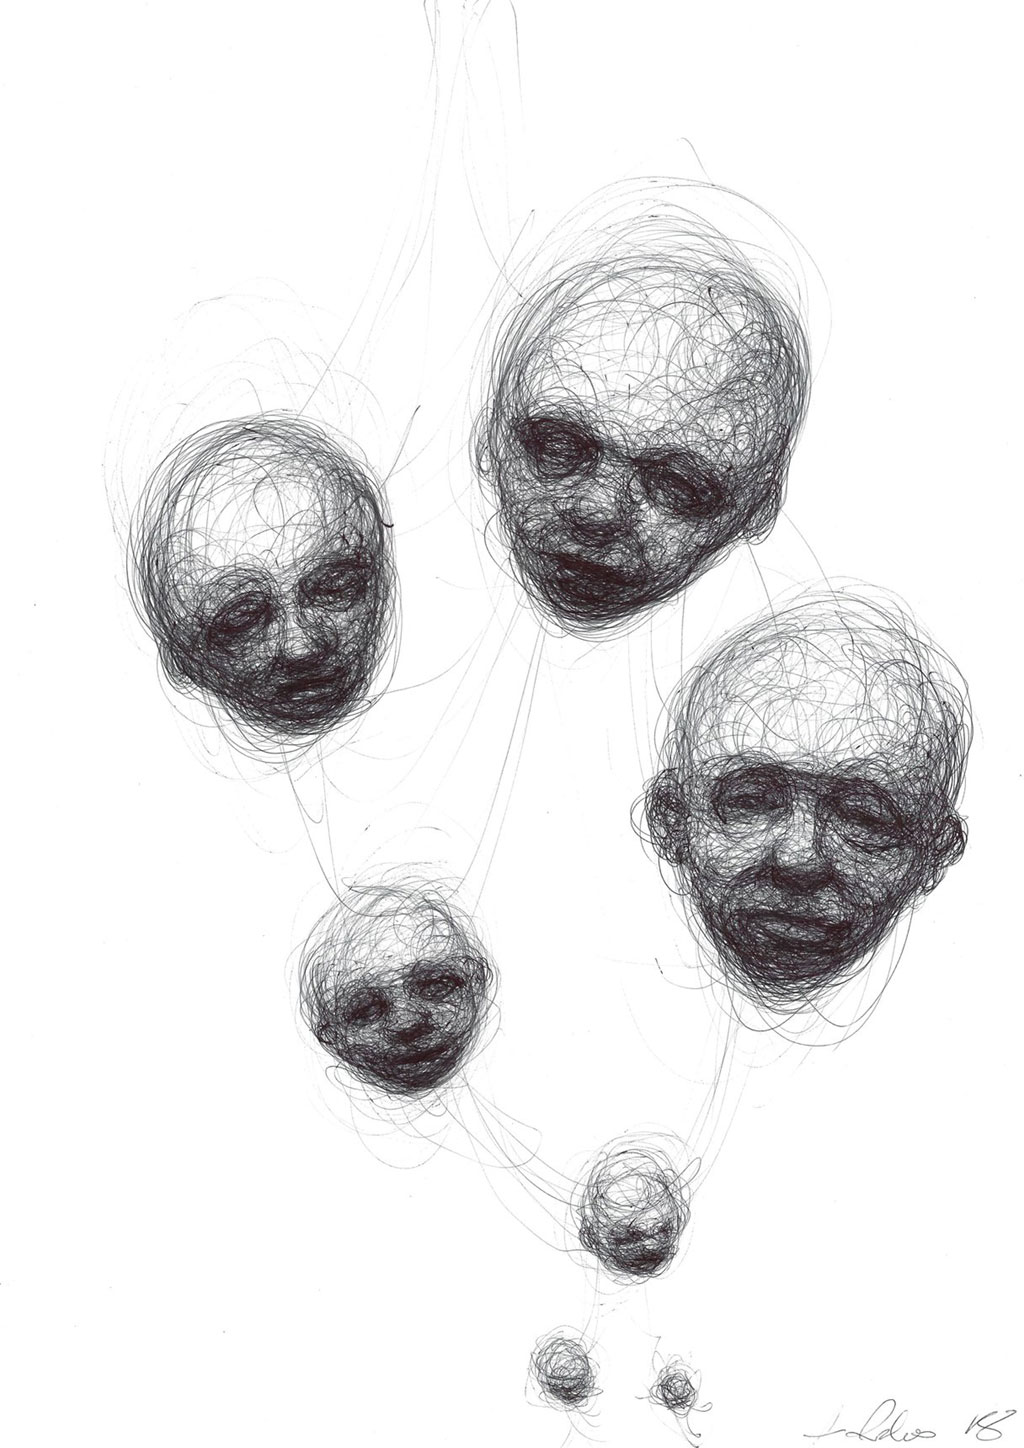 Ballpoint pen drawing of 7 heads getting larger as they reach the top of the page